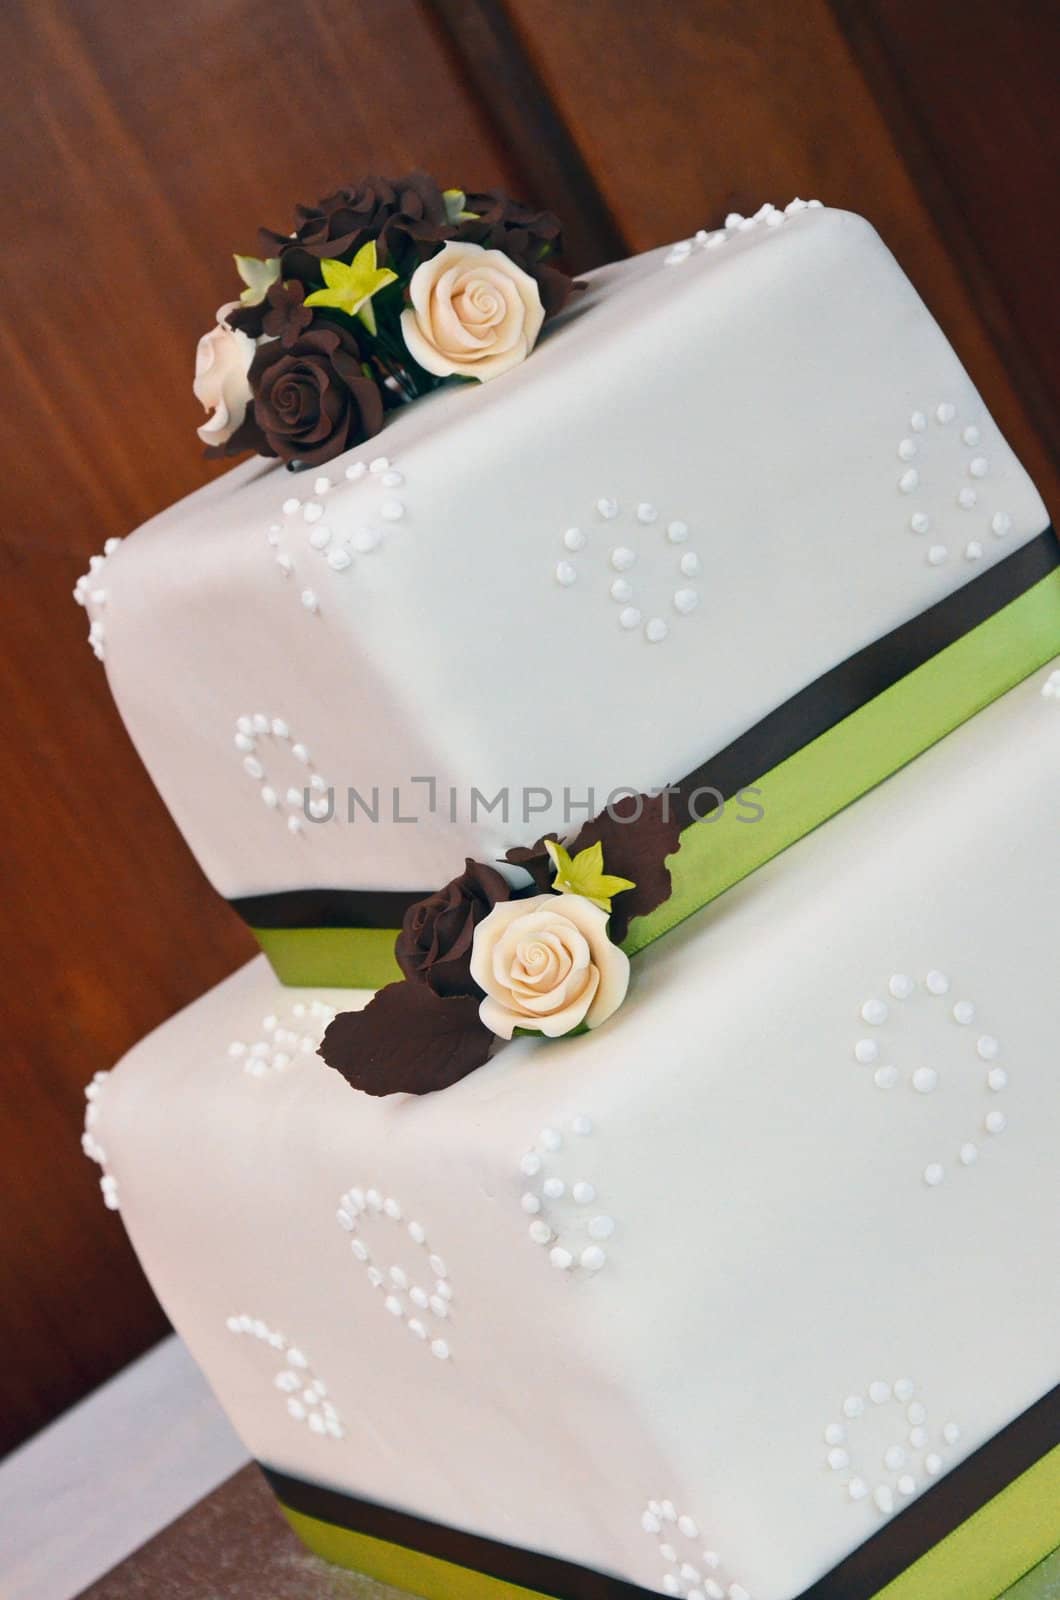 White fondant wedding cake with brown and pink roses